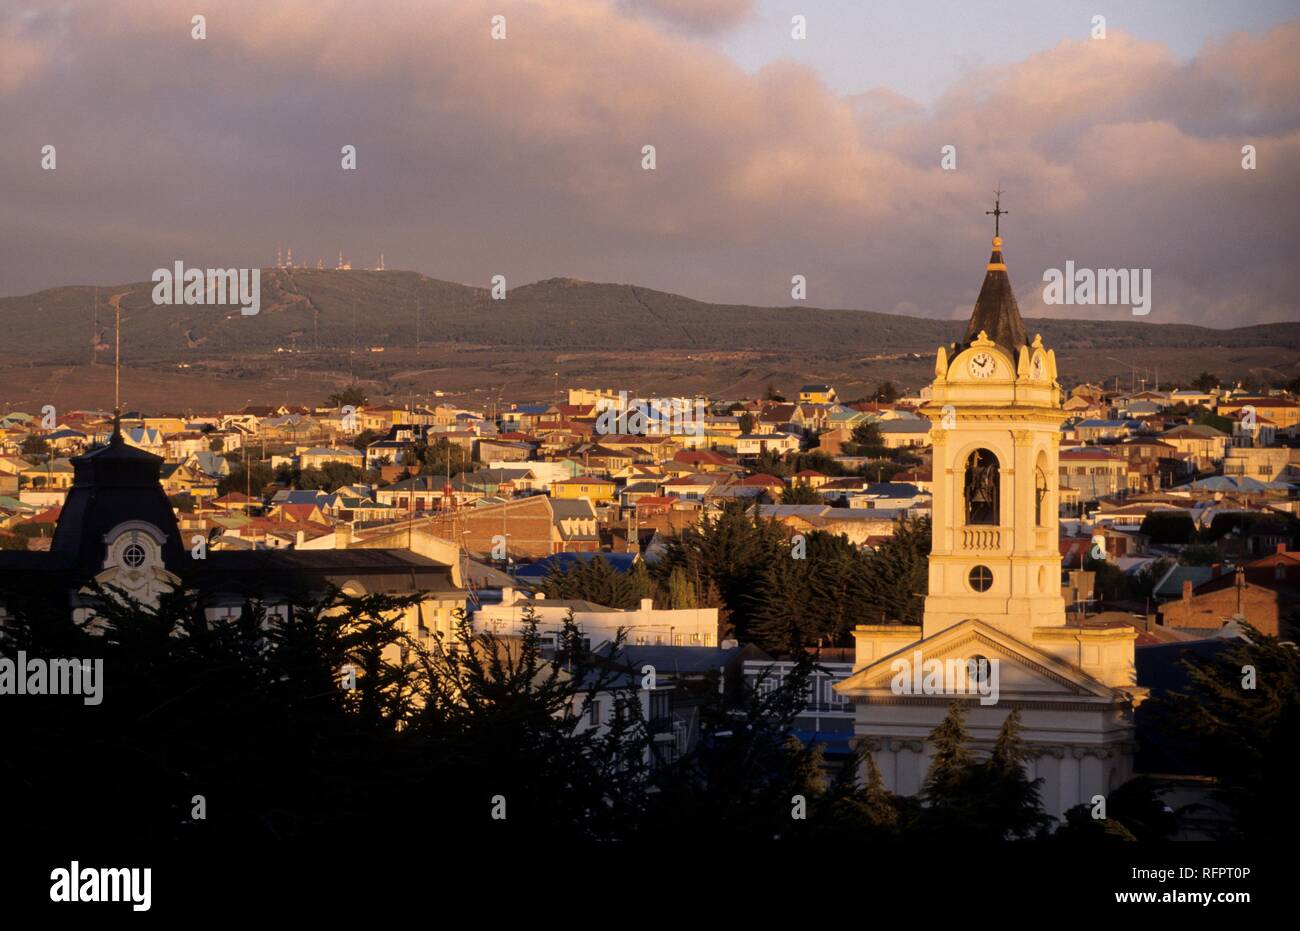 CHL, Chile, Patagonia, Punta Arenas: view of the town centre. Stock Photo